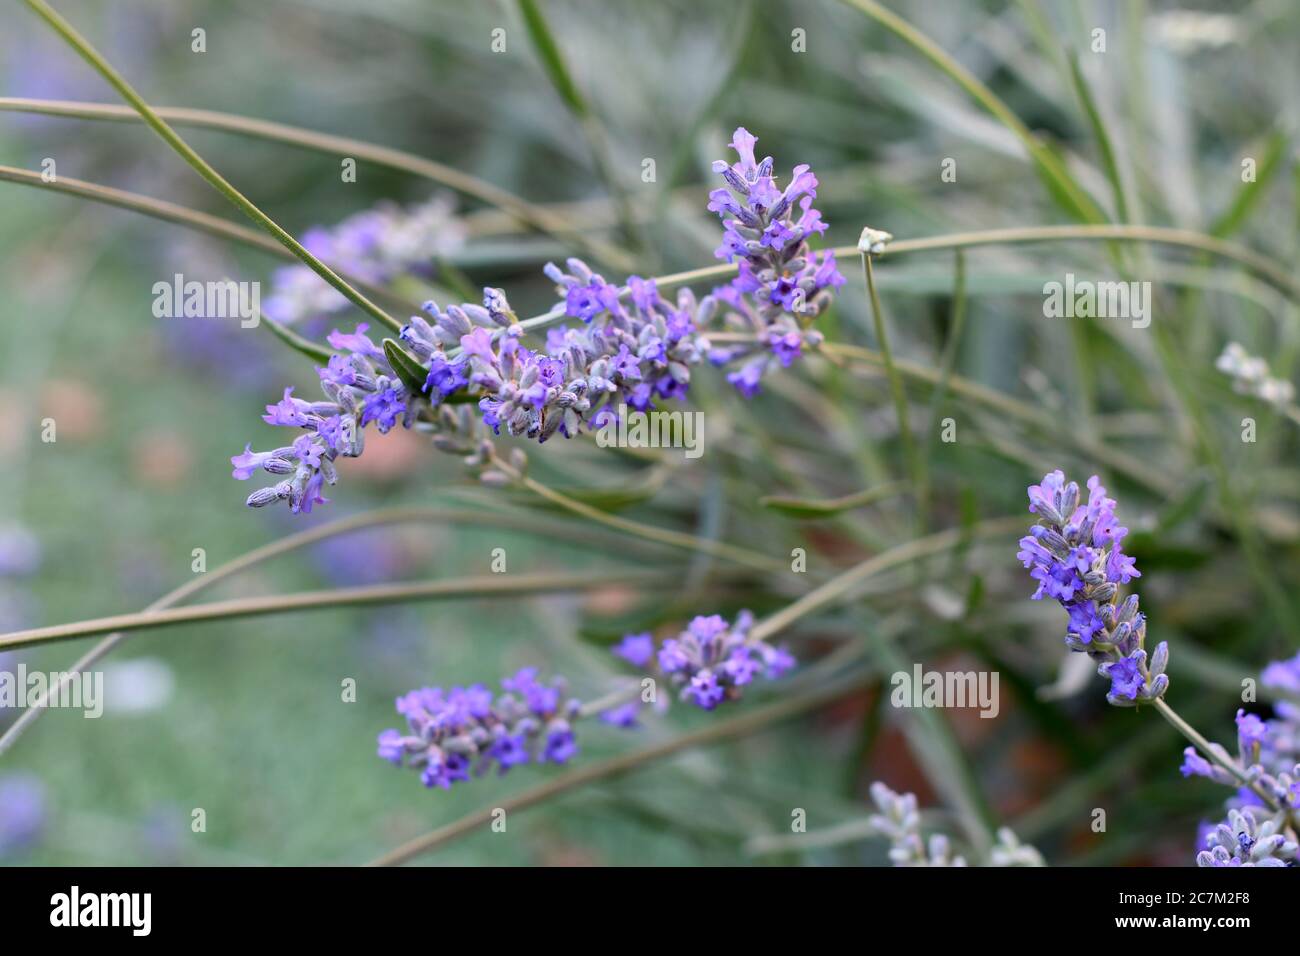 Lavender flowers in a garden Stock Photo